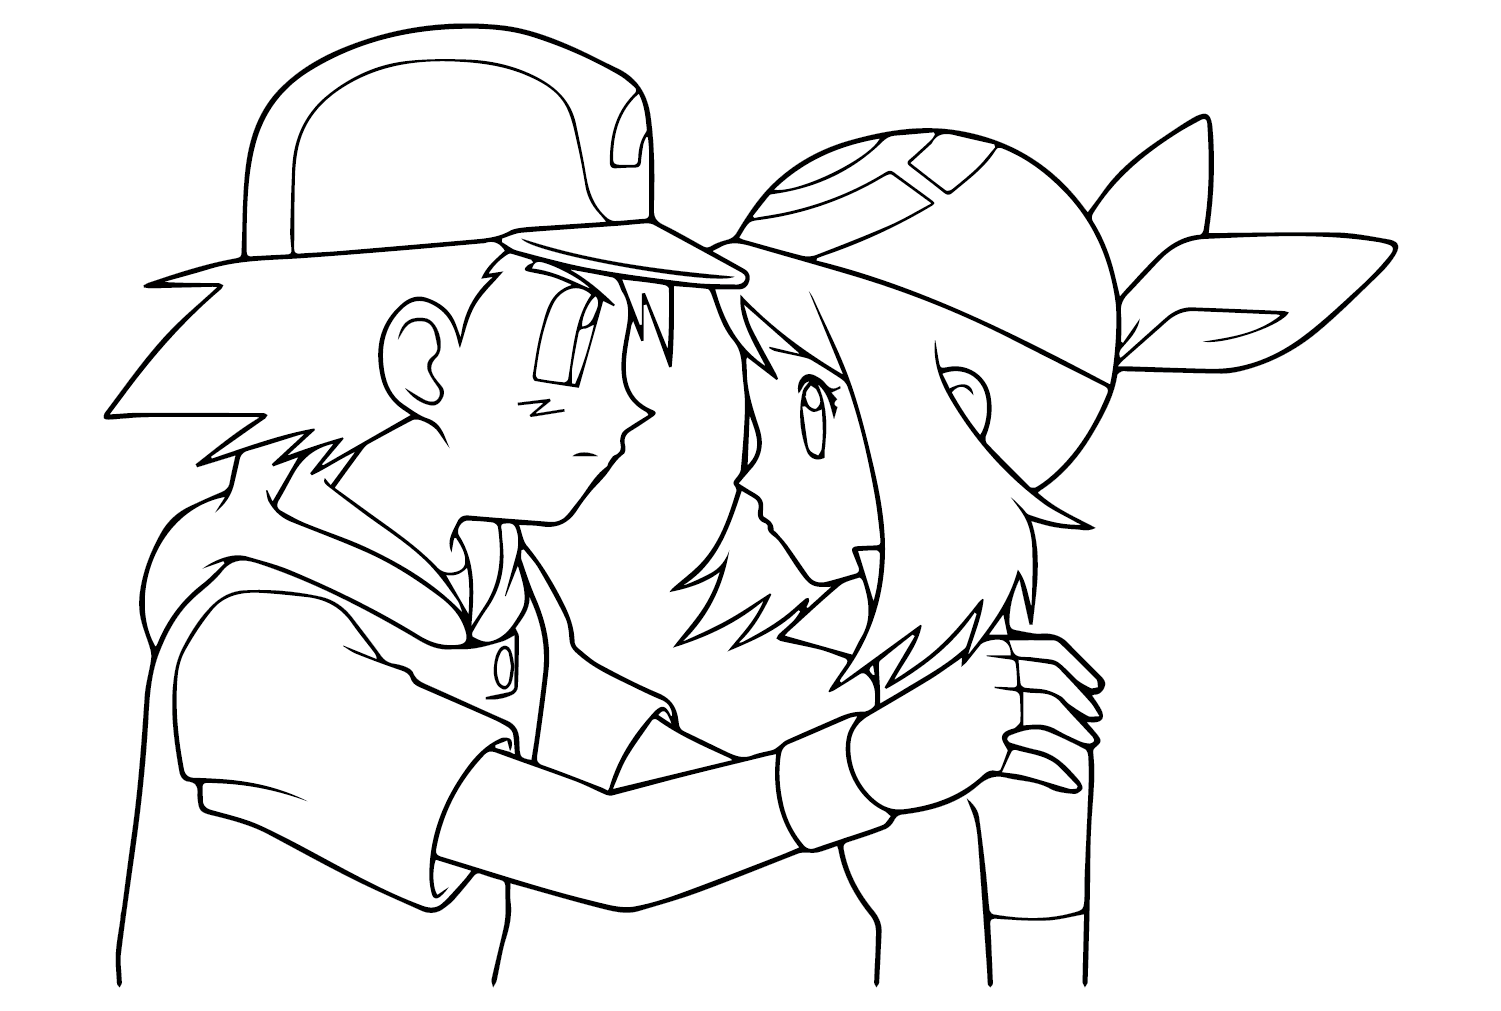 Ash and May Pokemon Coloring Page from May Pokemon